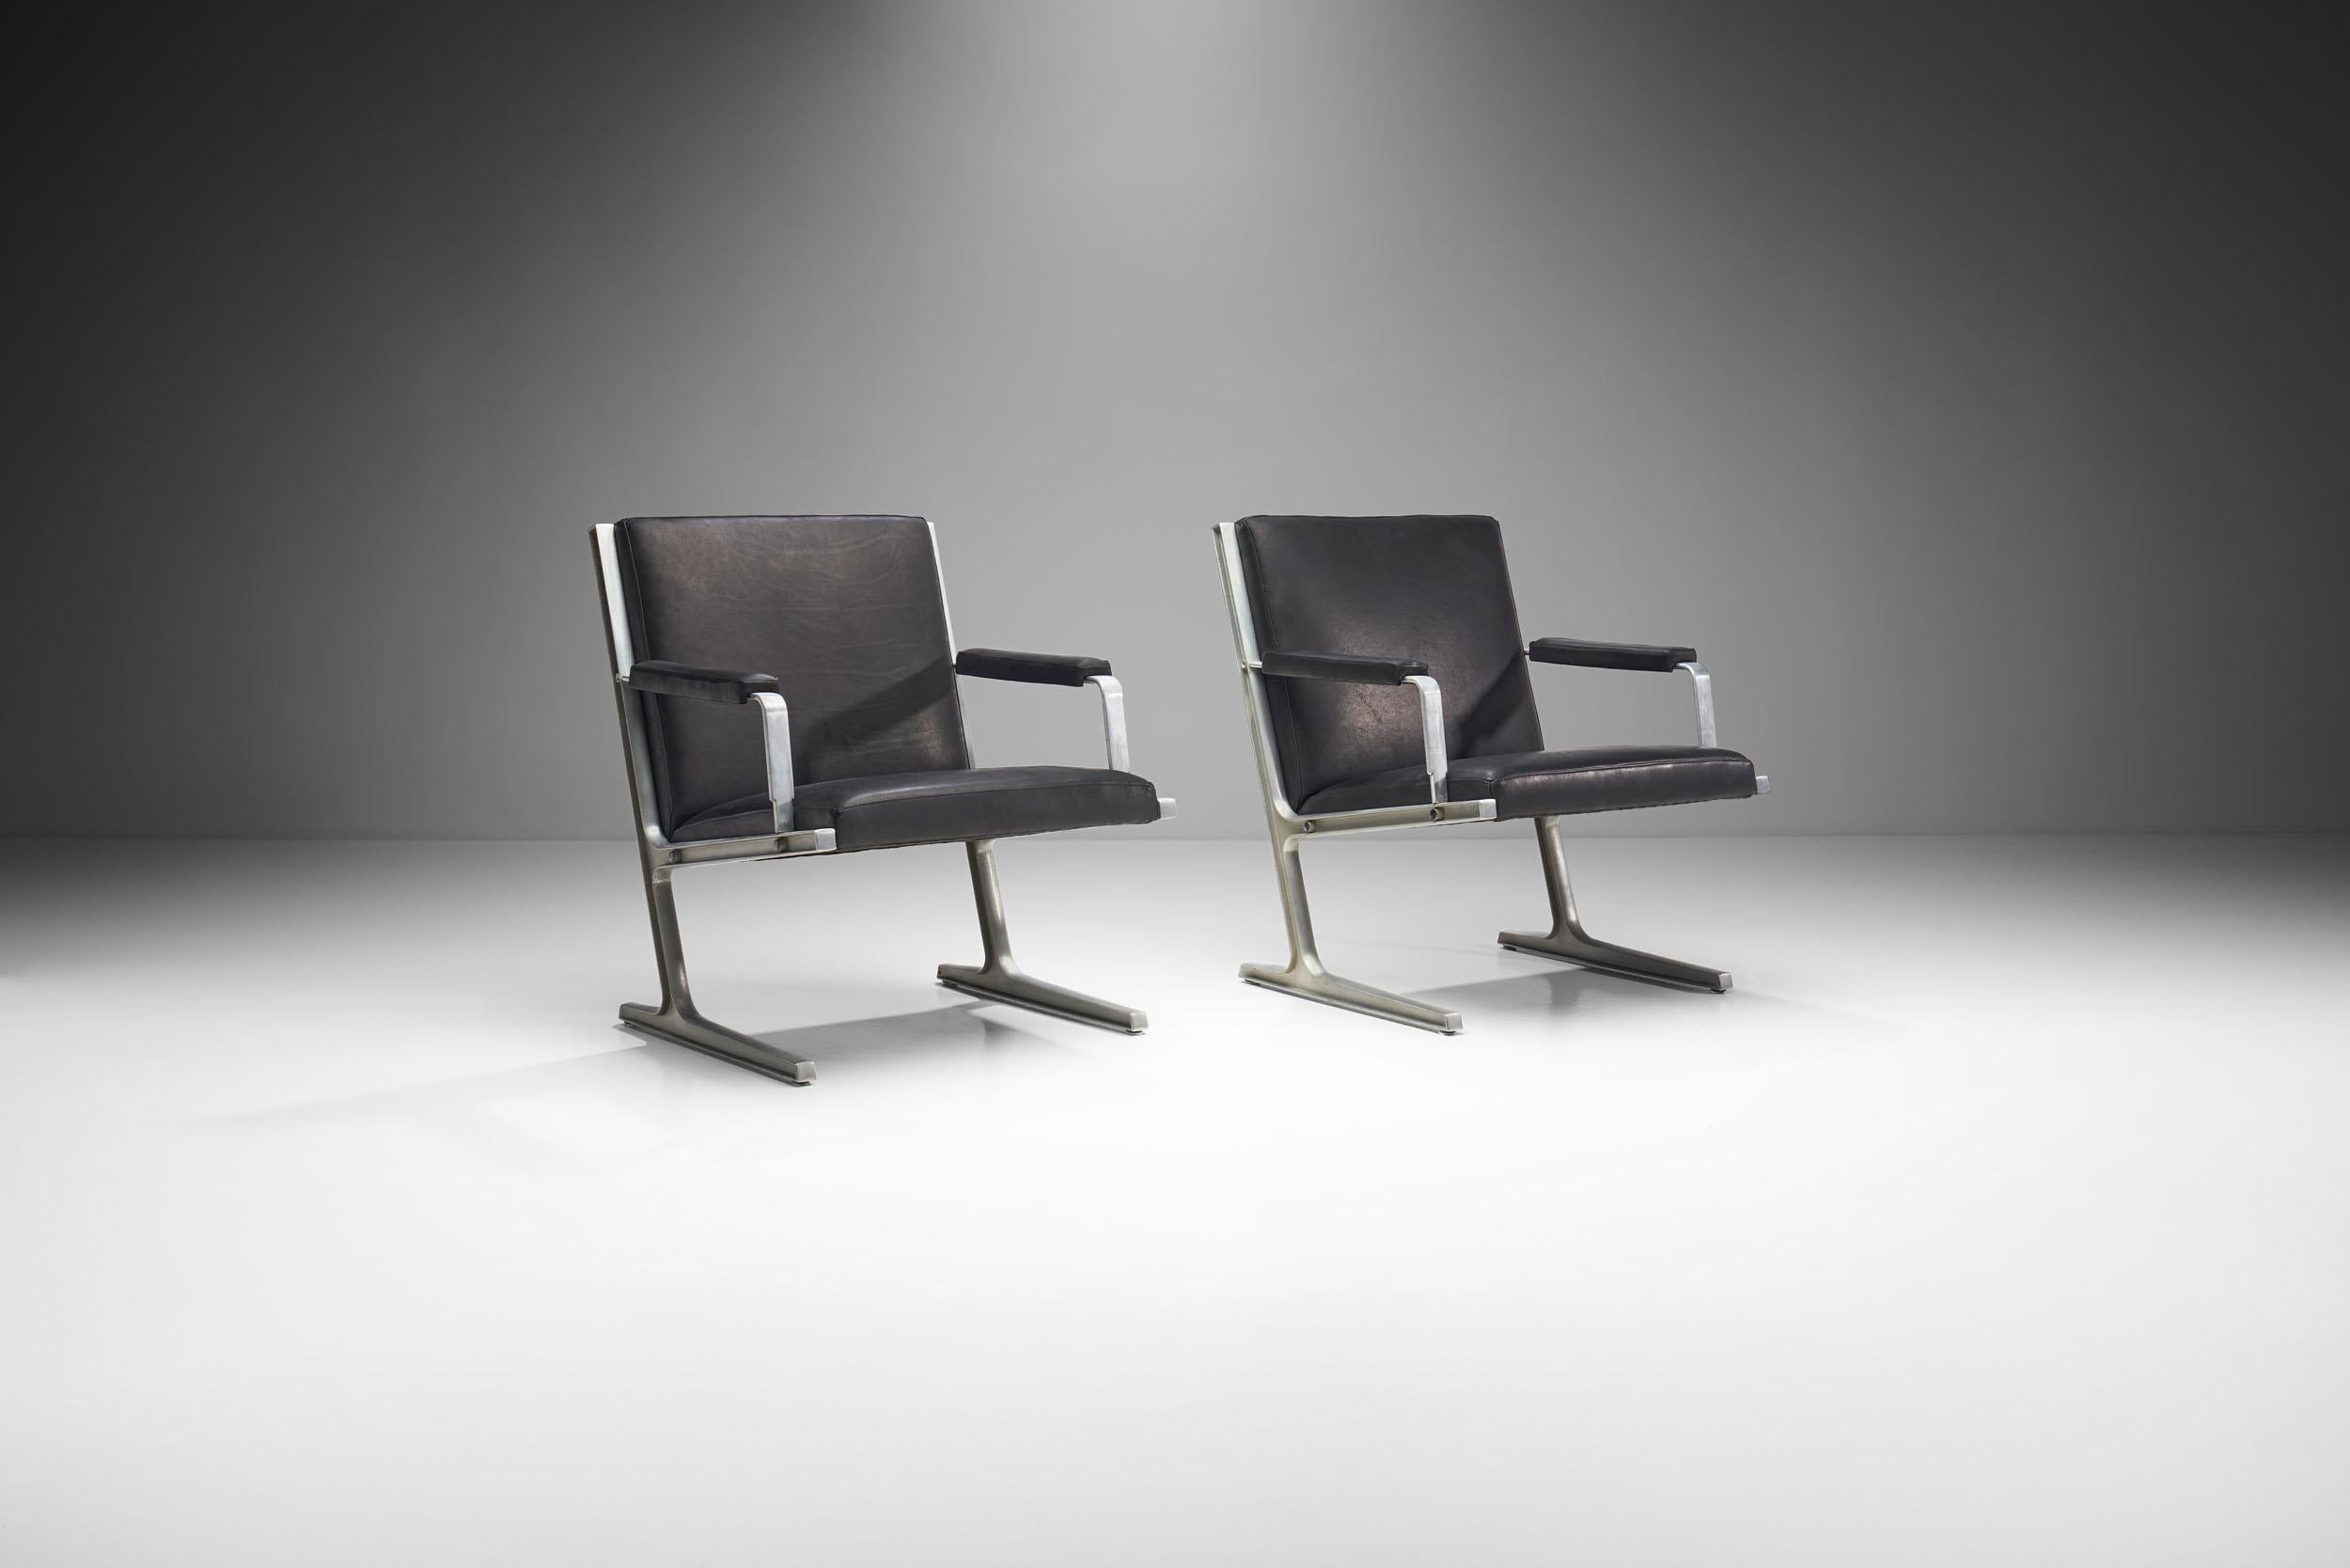 Scandinavian Modern Pair of “Lufthavns Stole” Chairs by Ditte Heath and Adrian Heath, Denmark, 1969 For Sale